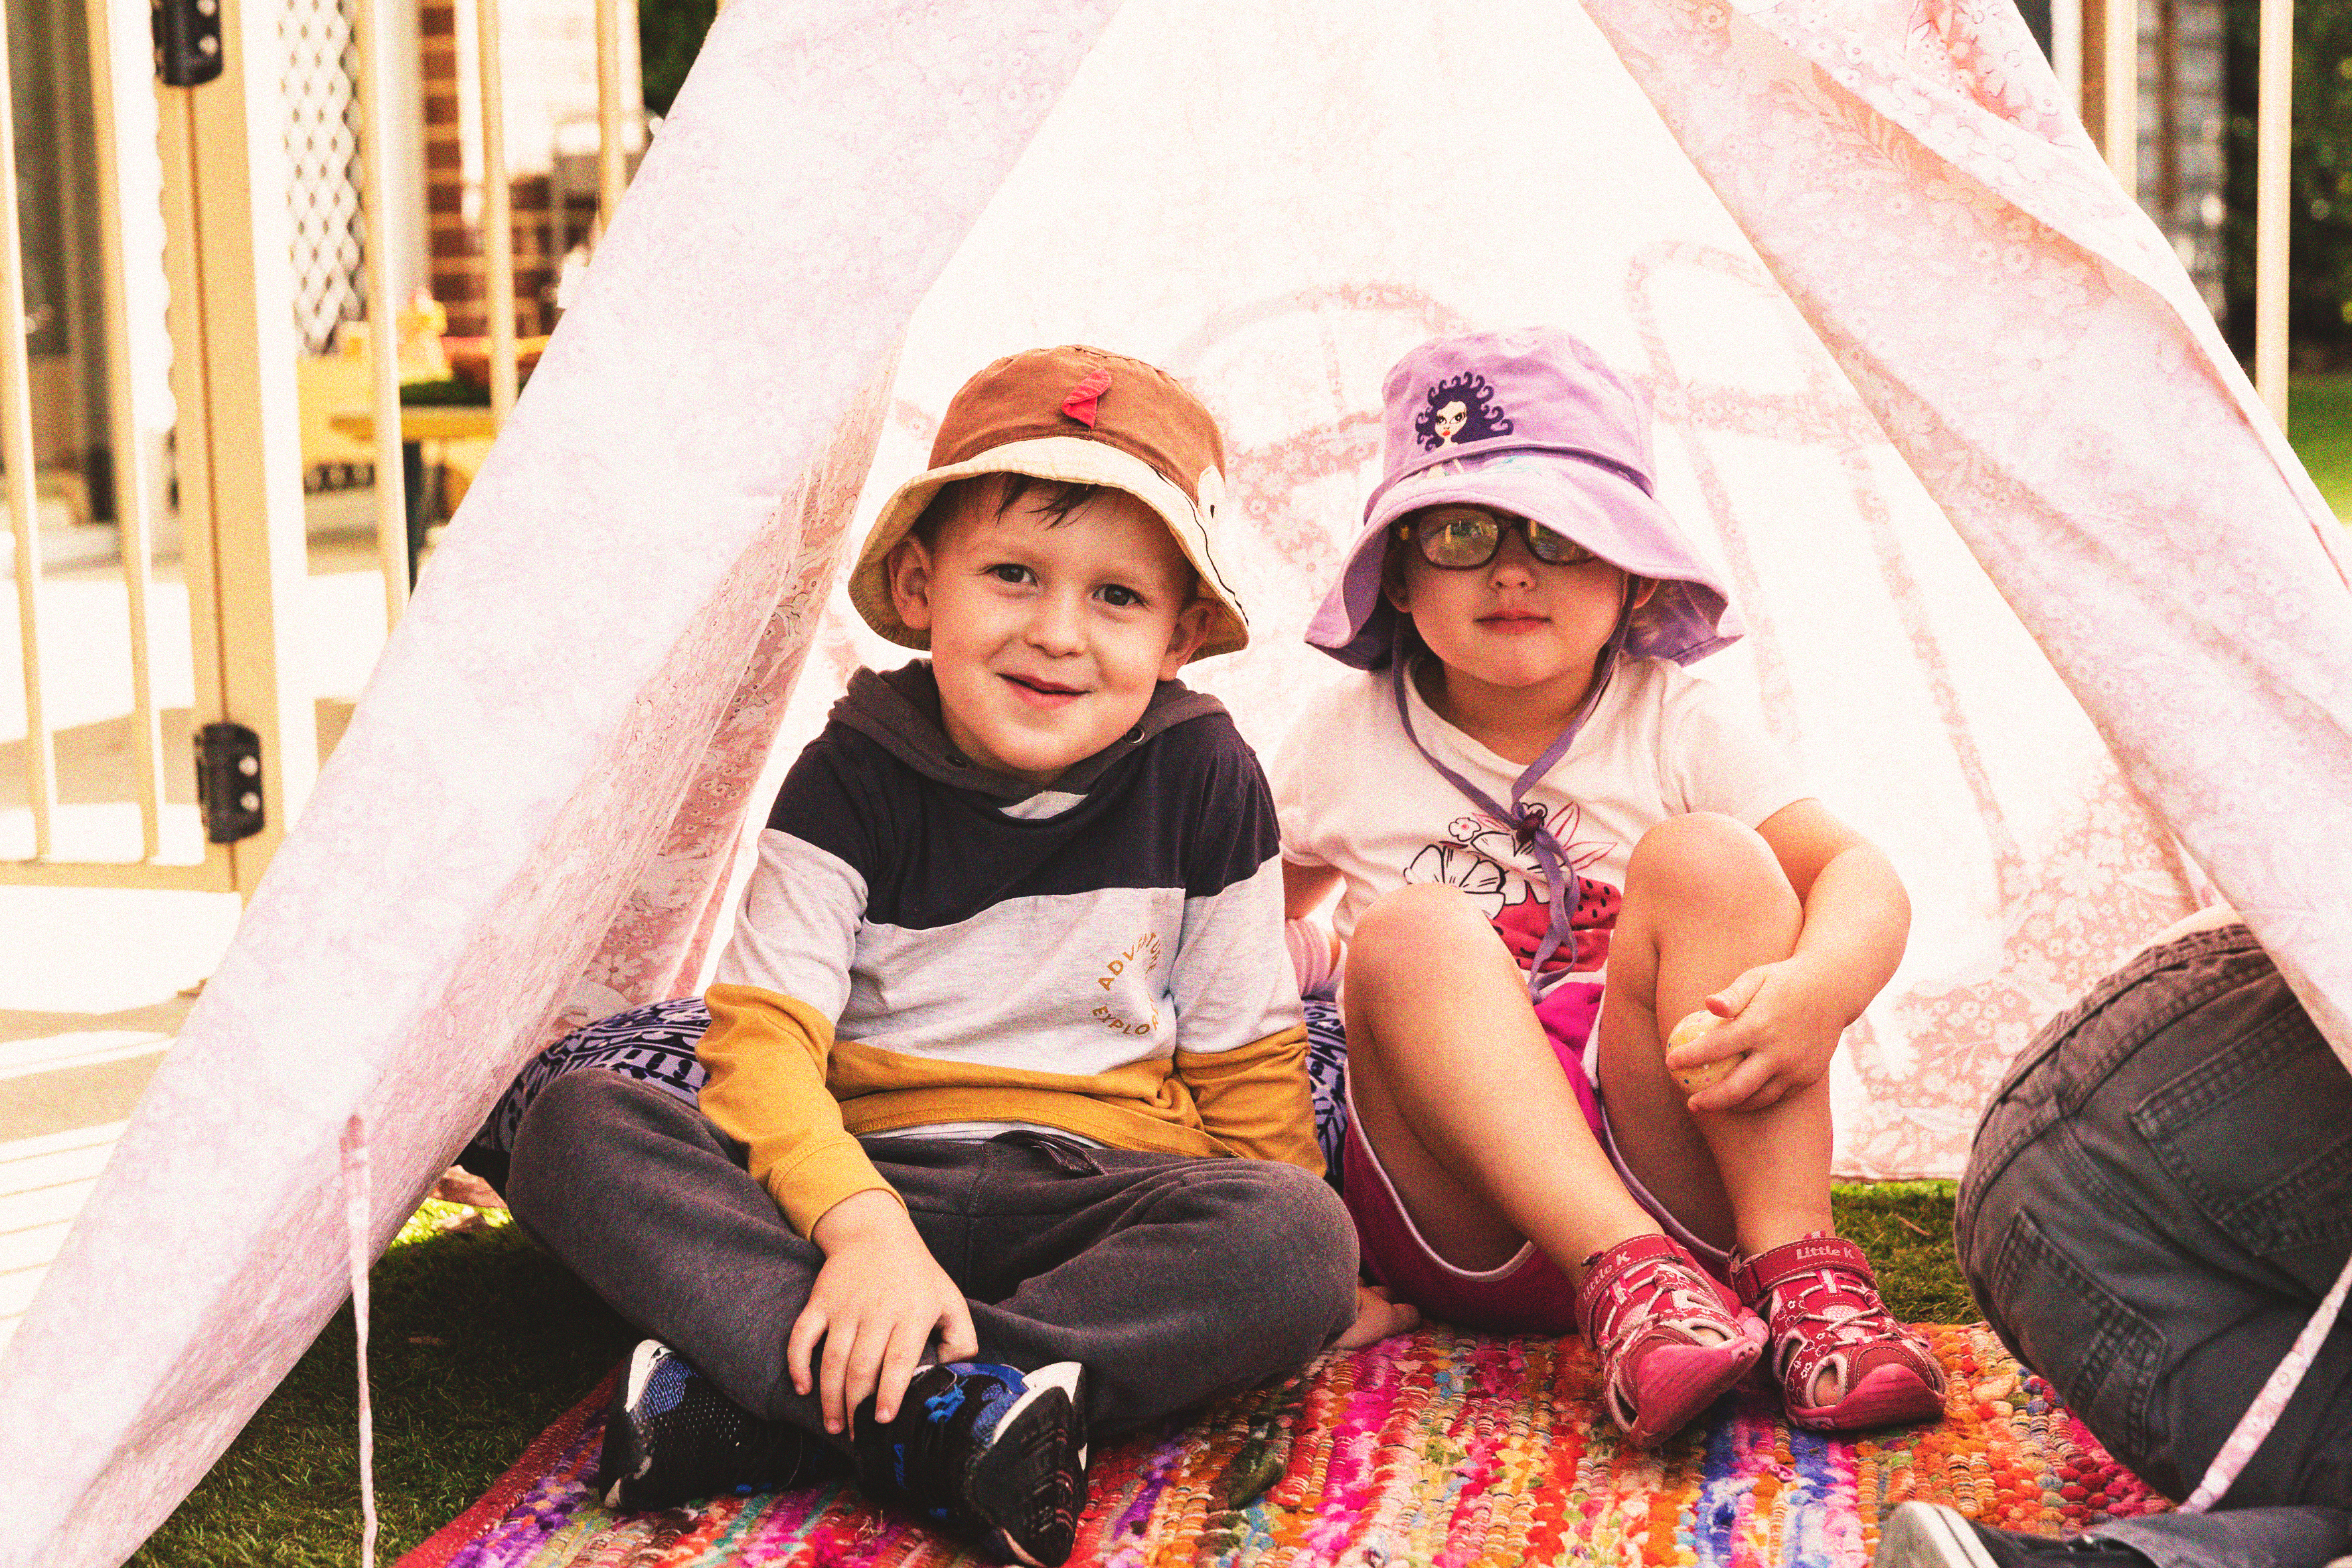 Two young children in a tent